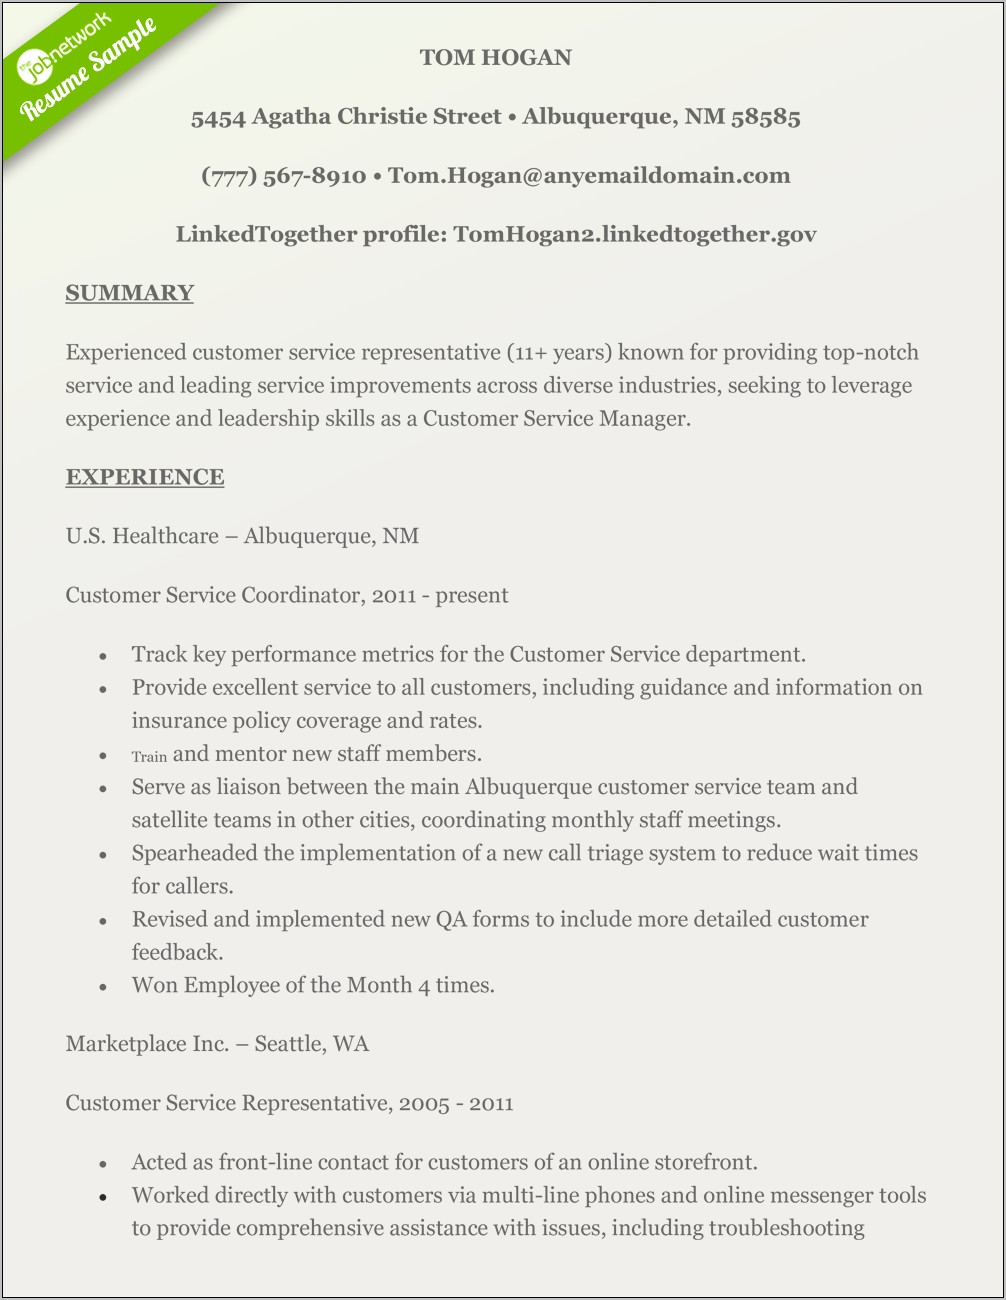 Resume Objective For Internal Promotion